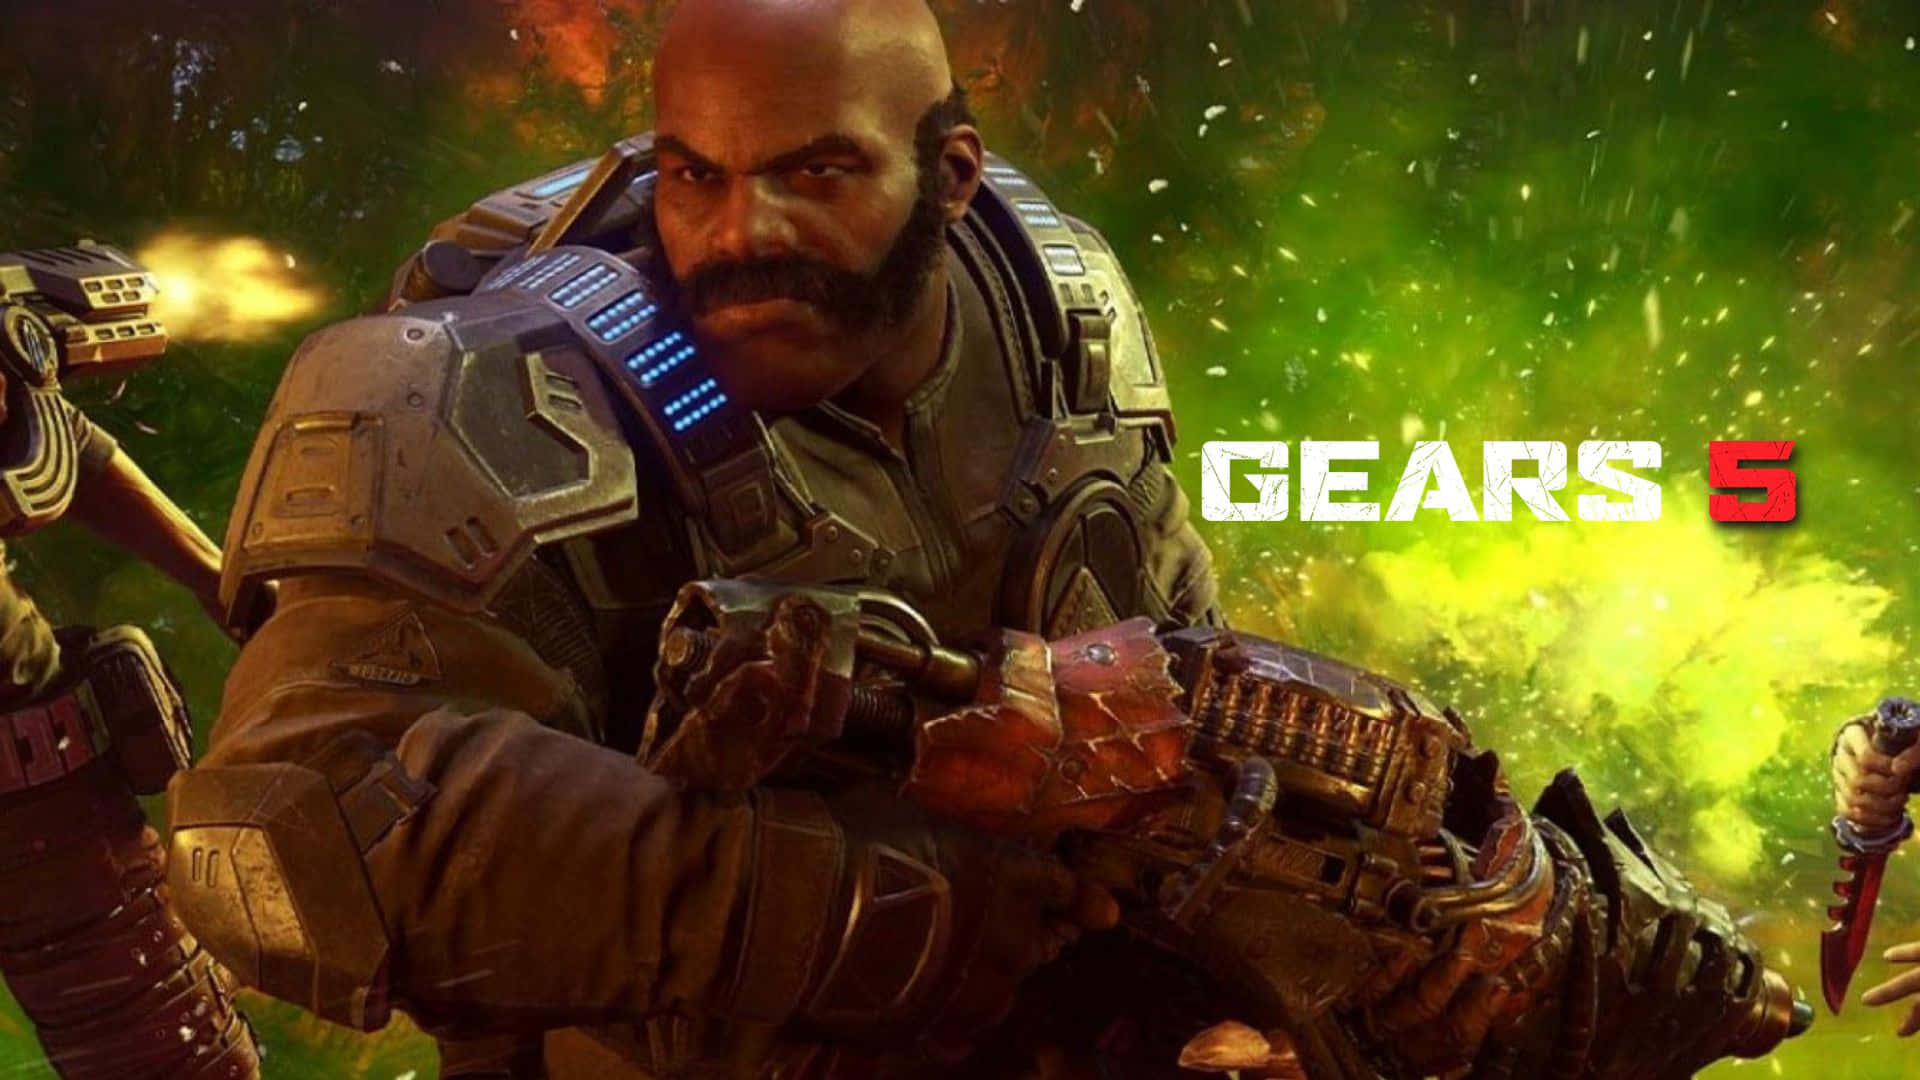 Witness the Ultimate Edition of the Spectacular Epic Action Shooter, Gears of War 5!